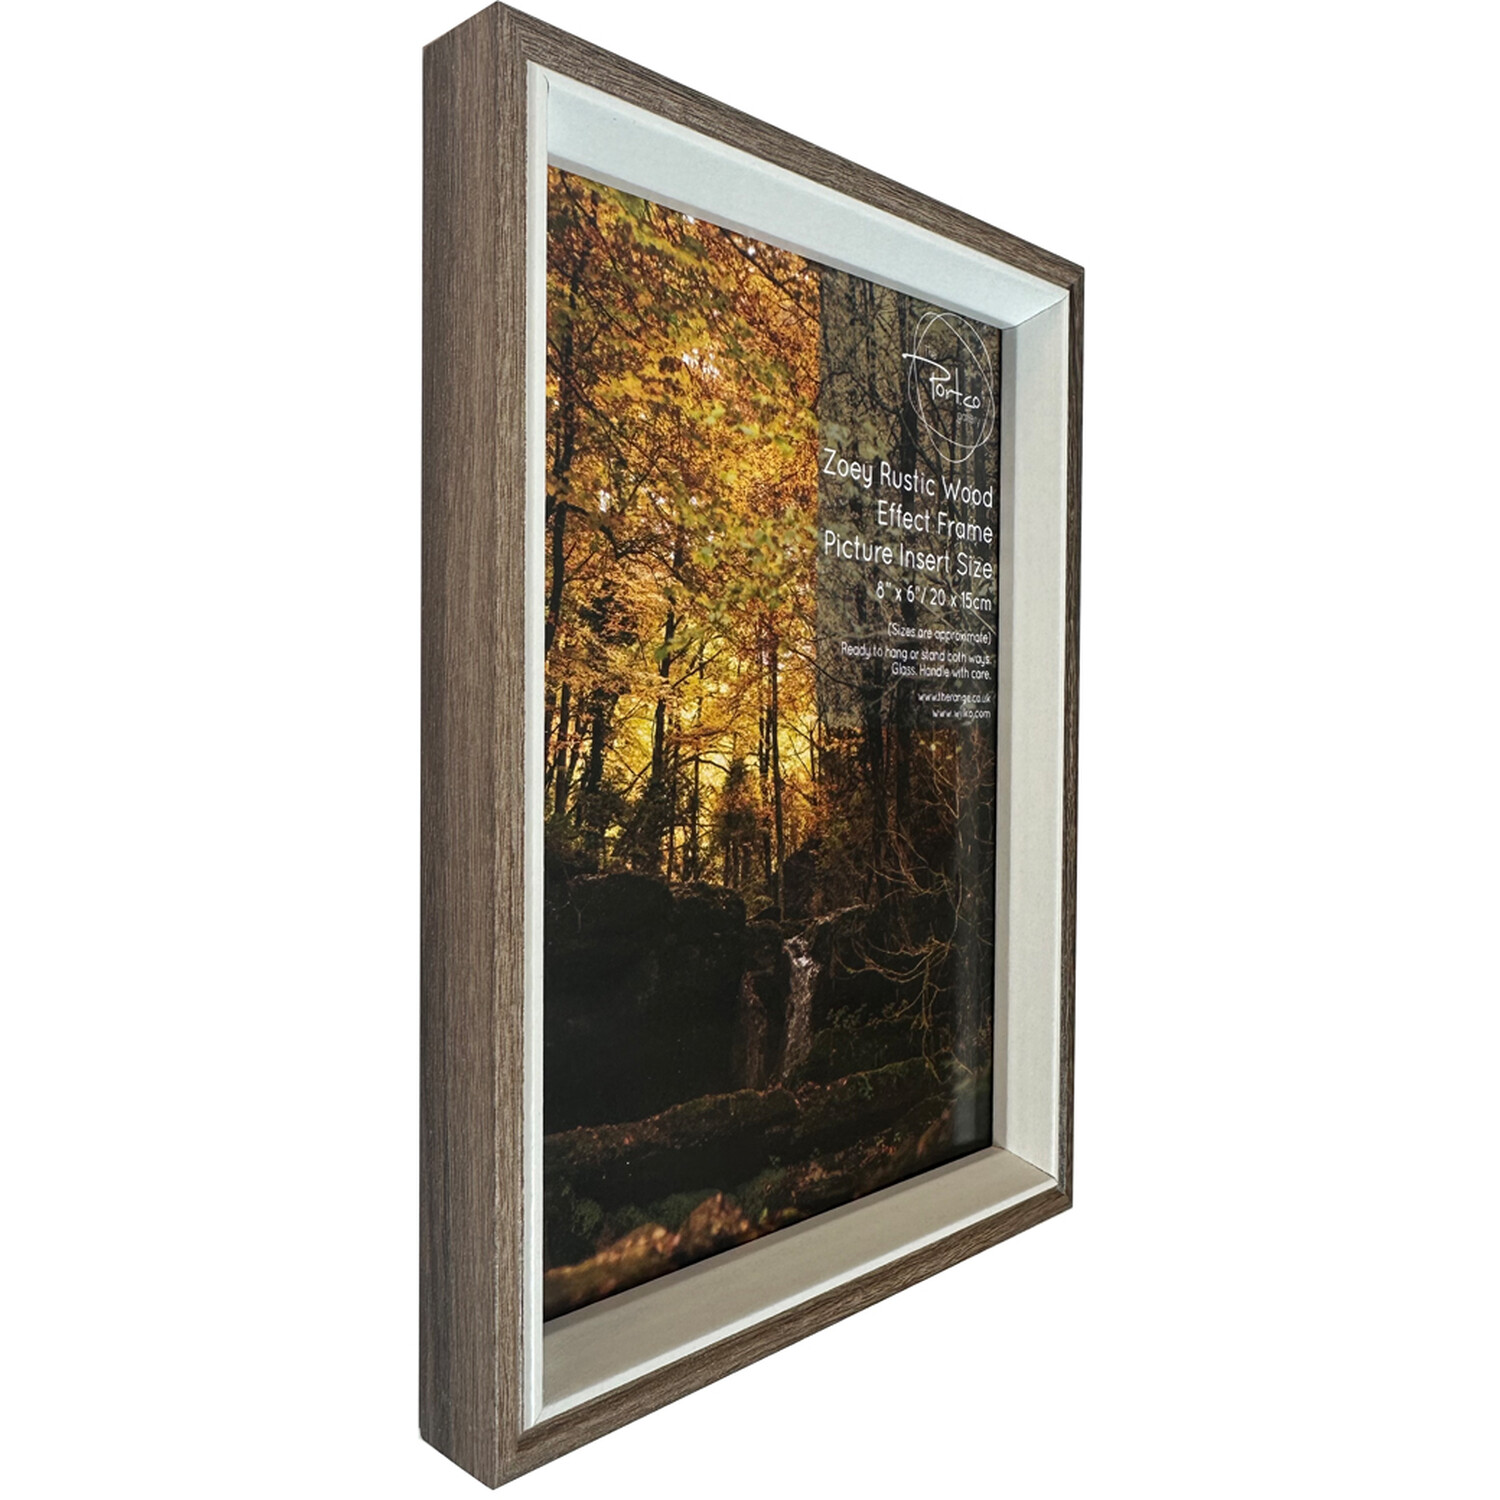 Zoey Rustic Wood Effect Frame - Brown / 8x6in Image 2